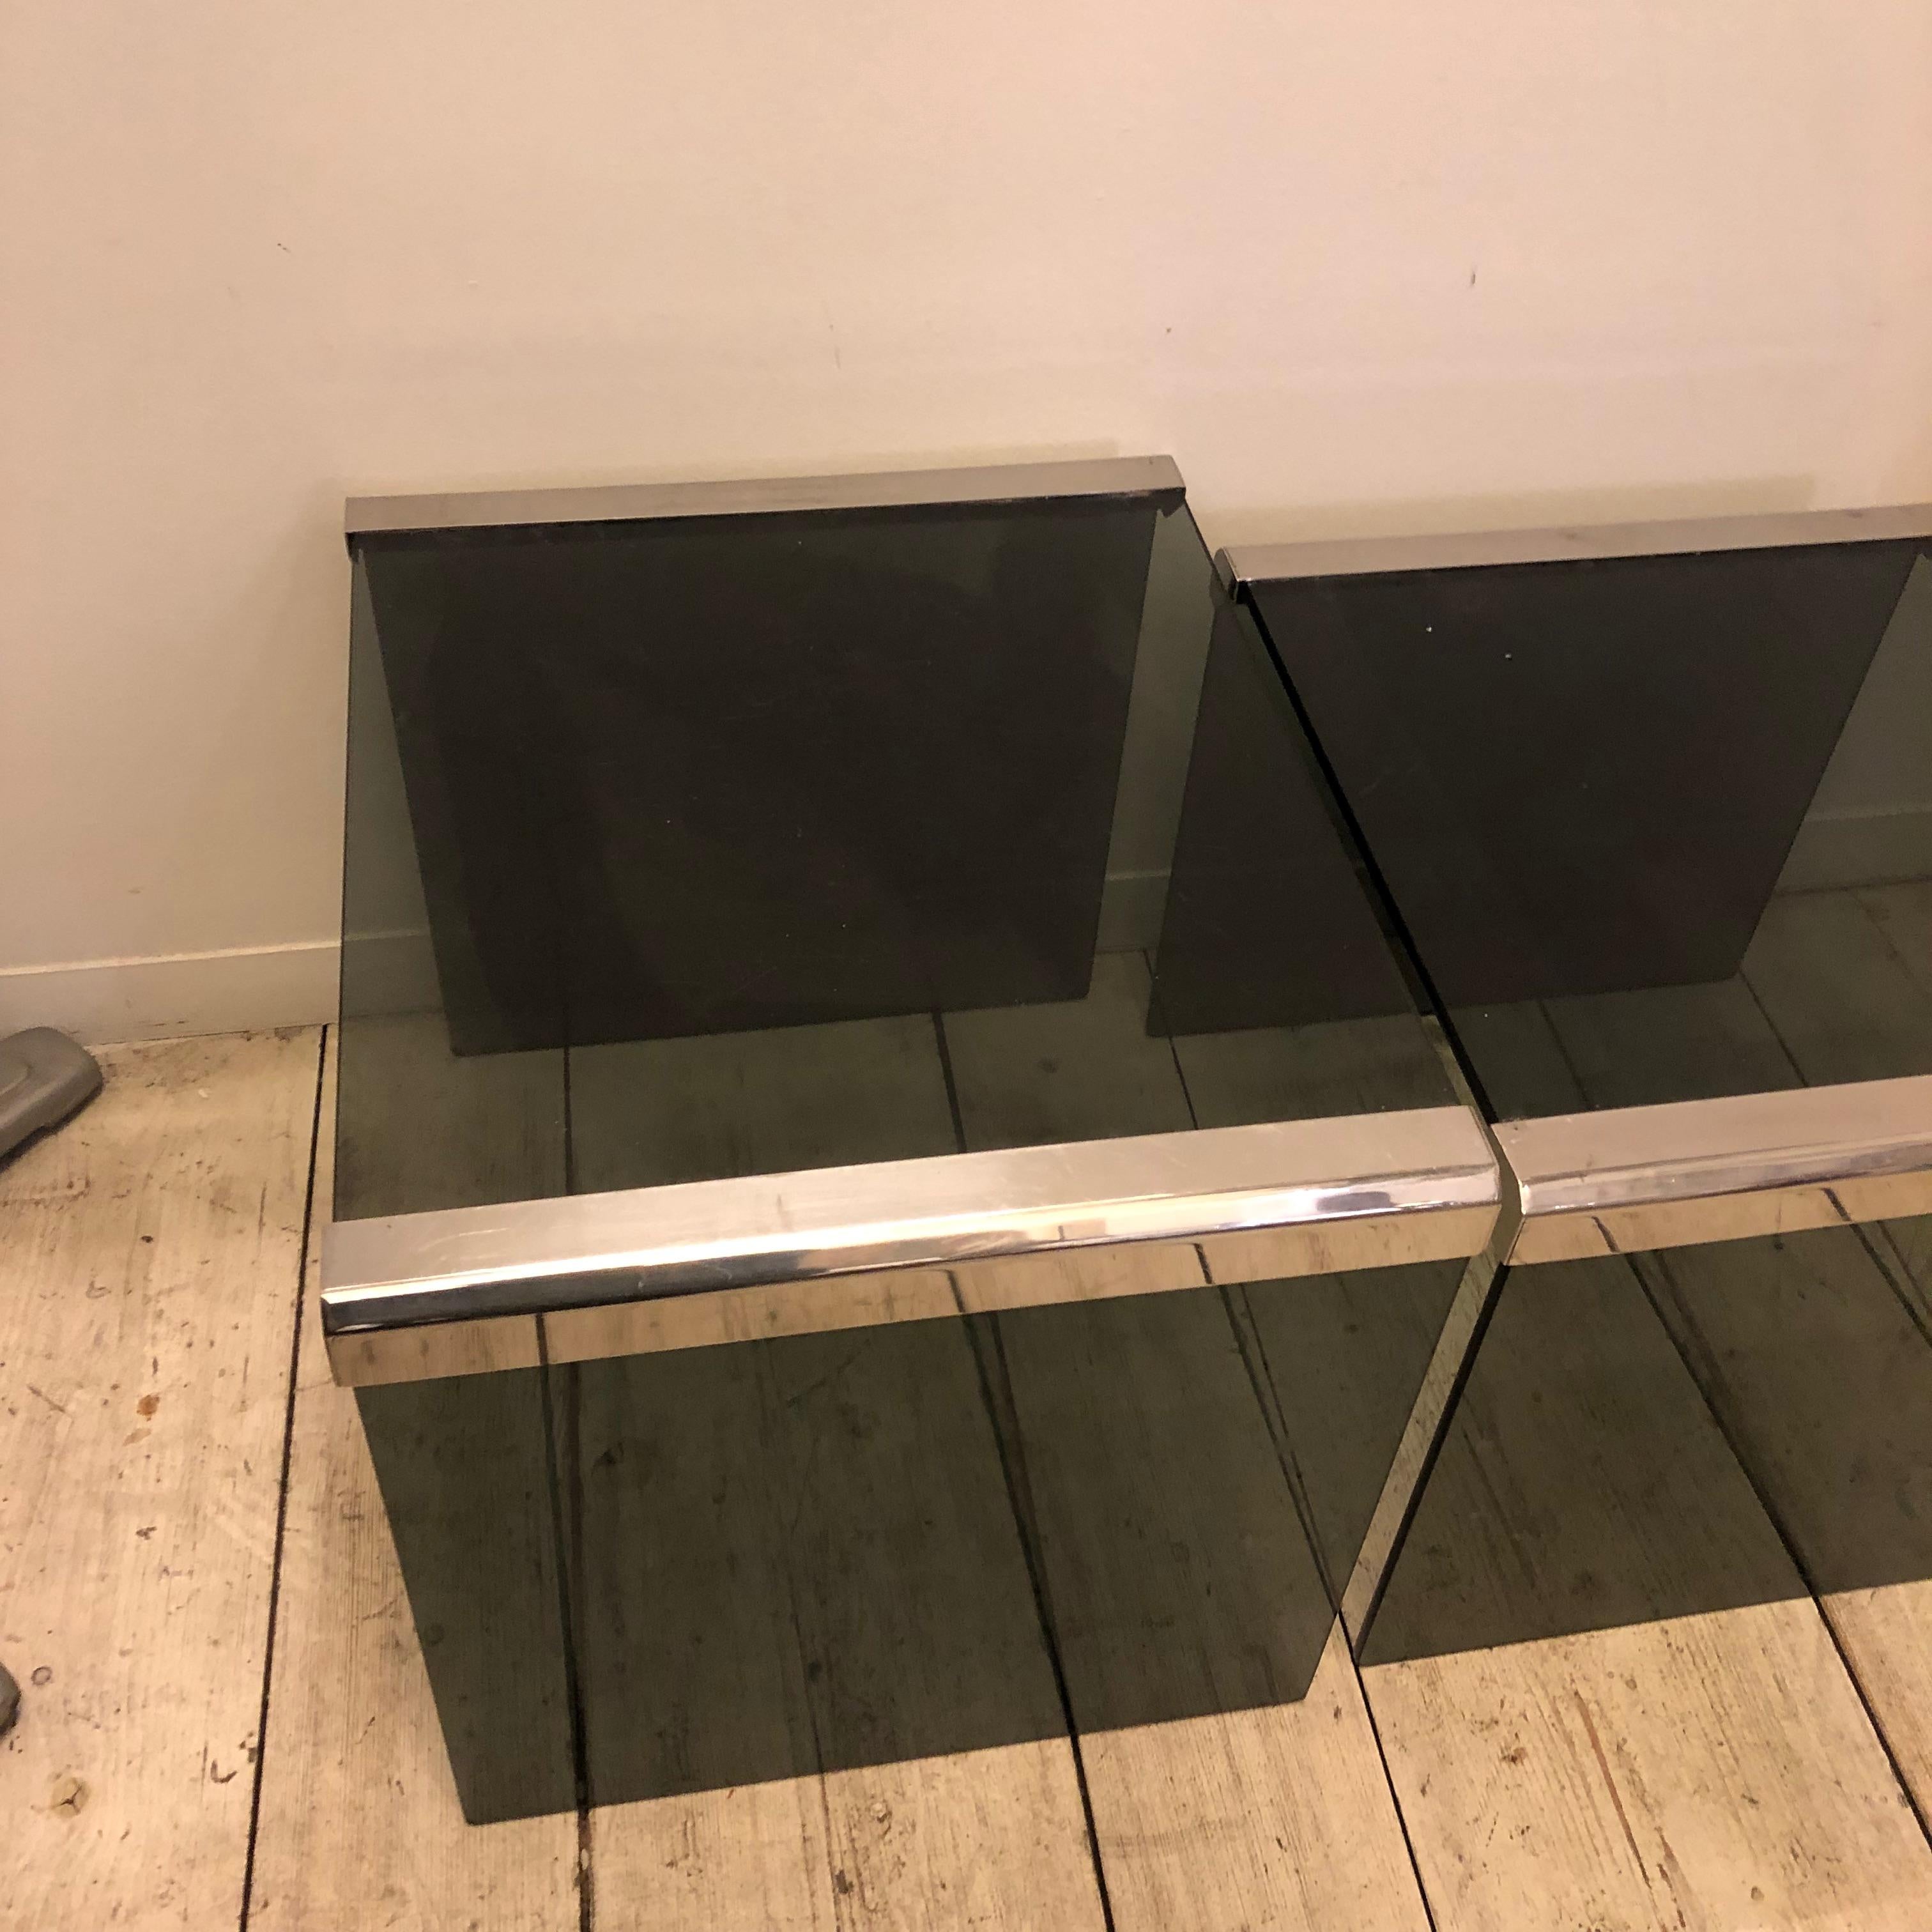 Two side table designed by Pierangelo Gallotti for Gallotti & Radice made in Italy in the 1980s. Size of the small one, height cm 37 cm 39 x 43.